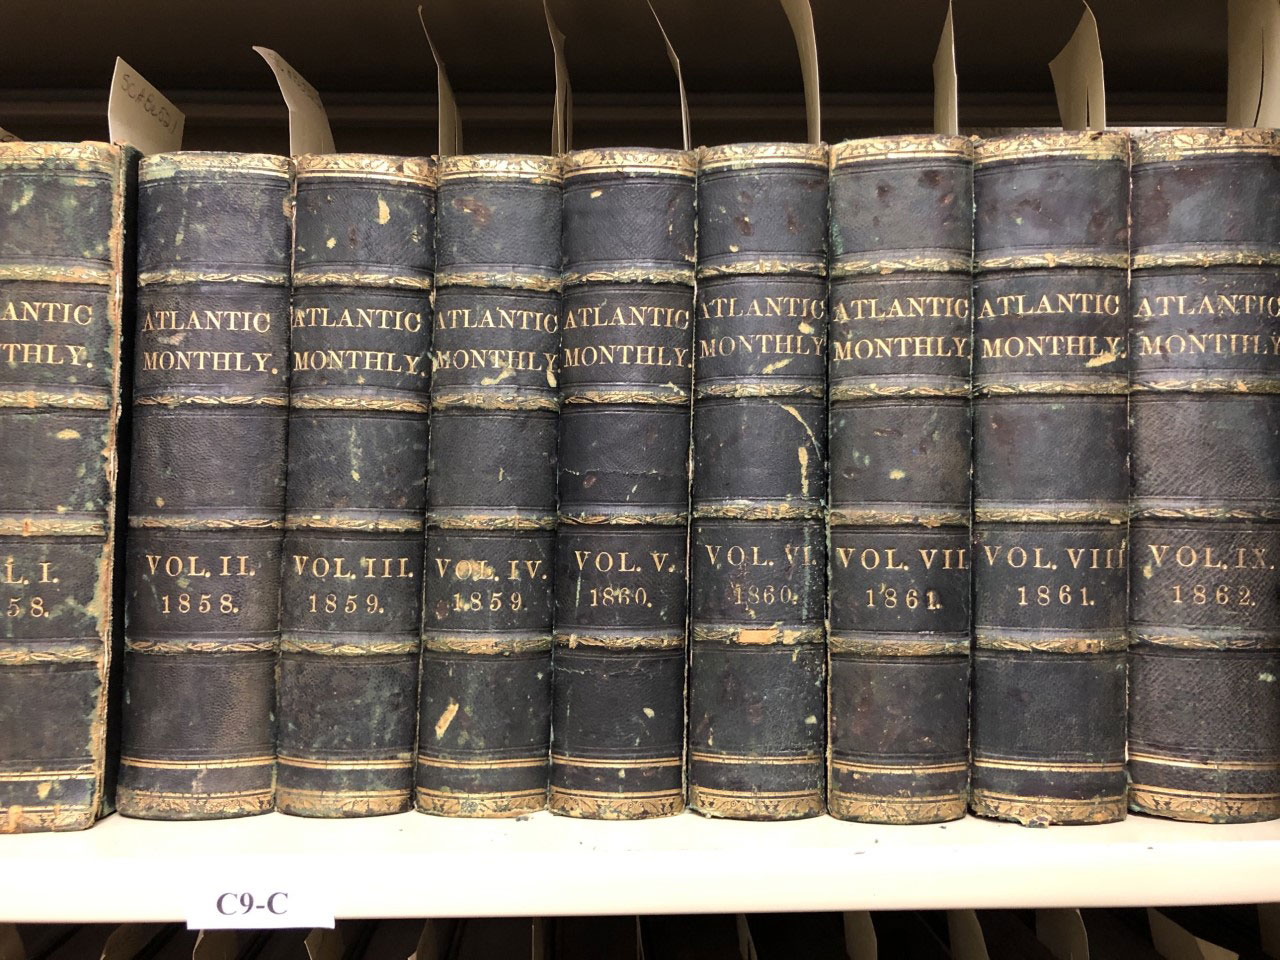 Bound issues of the "Atlantic Monthly" from the Bentley Rare Book Museum.